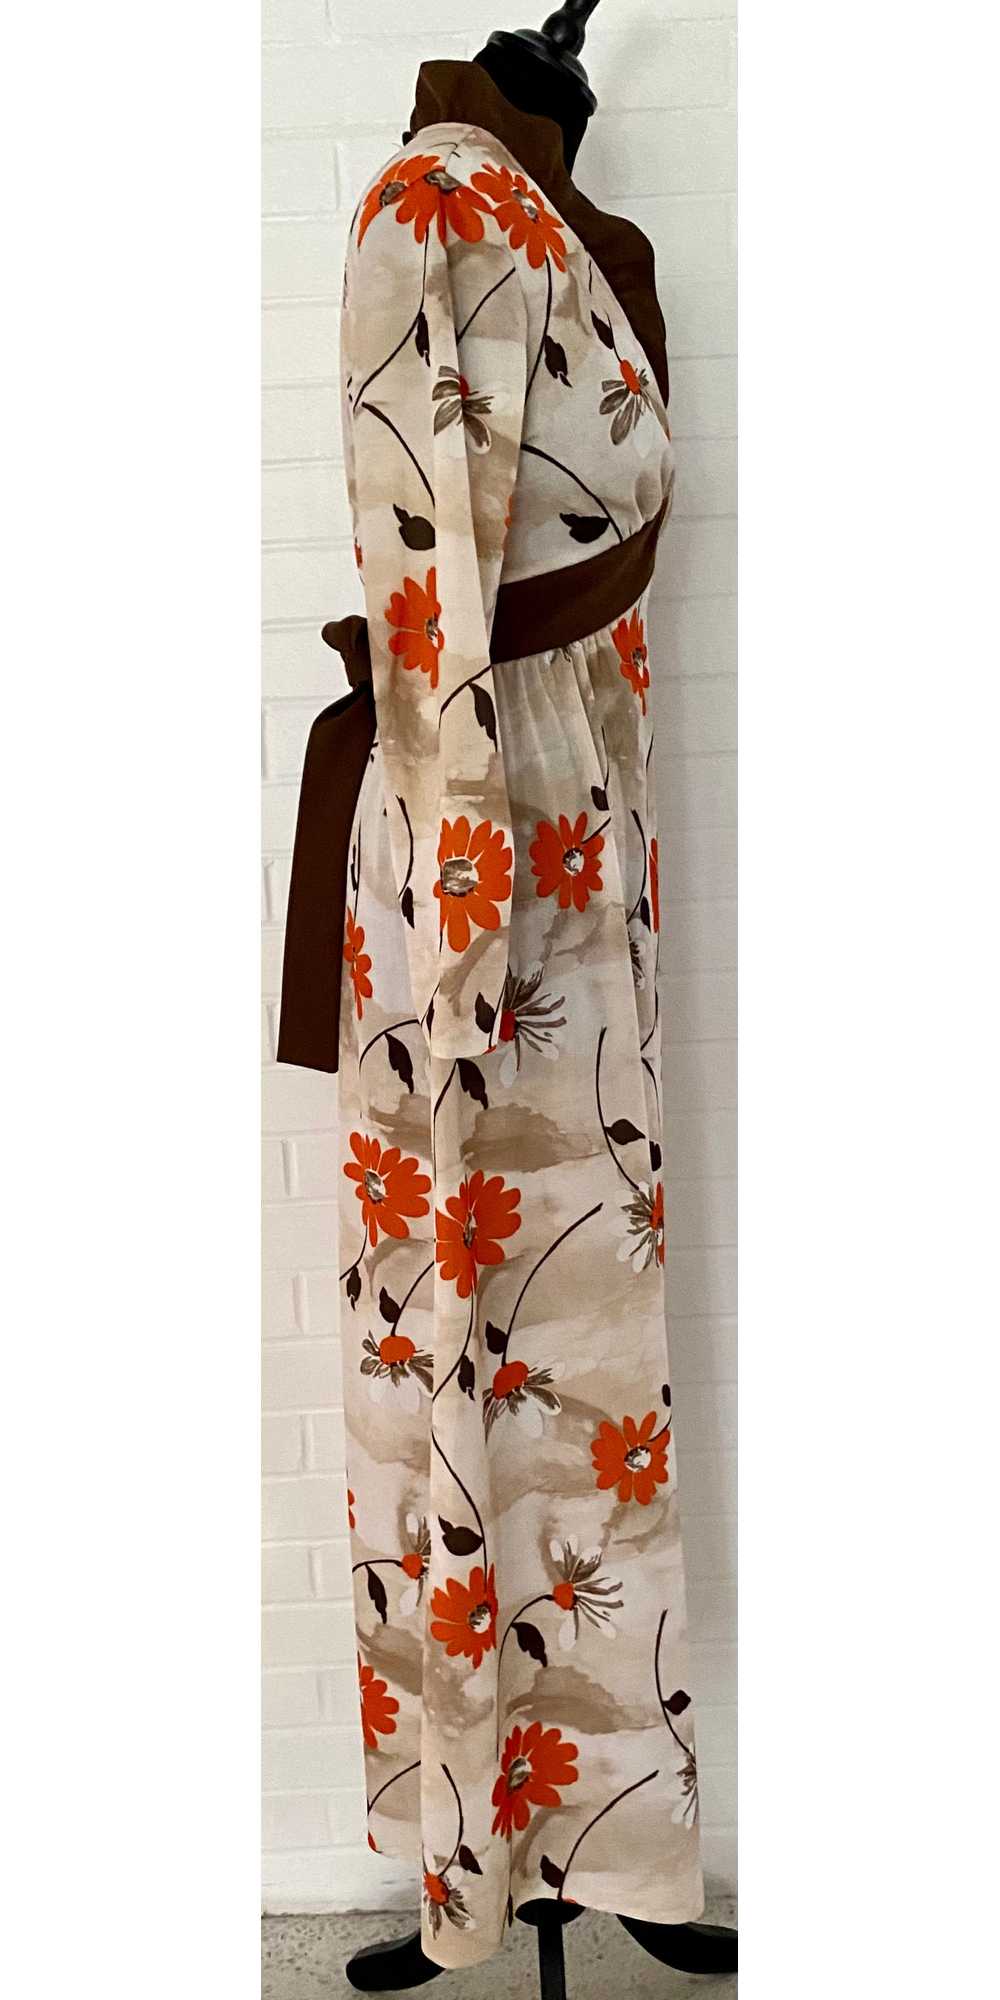 Late 60s/ Early 70s Flowered Maxi Dress - image 7